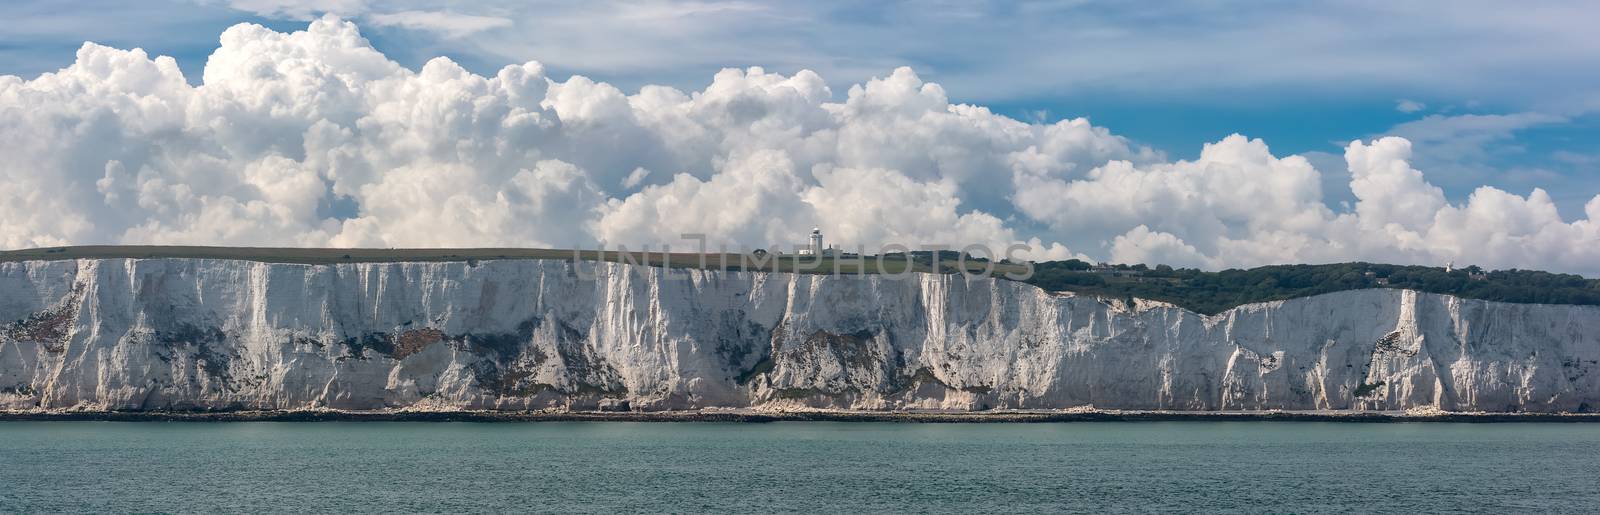 Wide angle panoramic shot of White Cliffs of Dover by DamantisZ